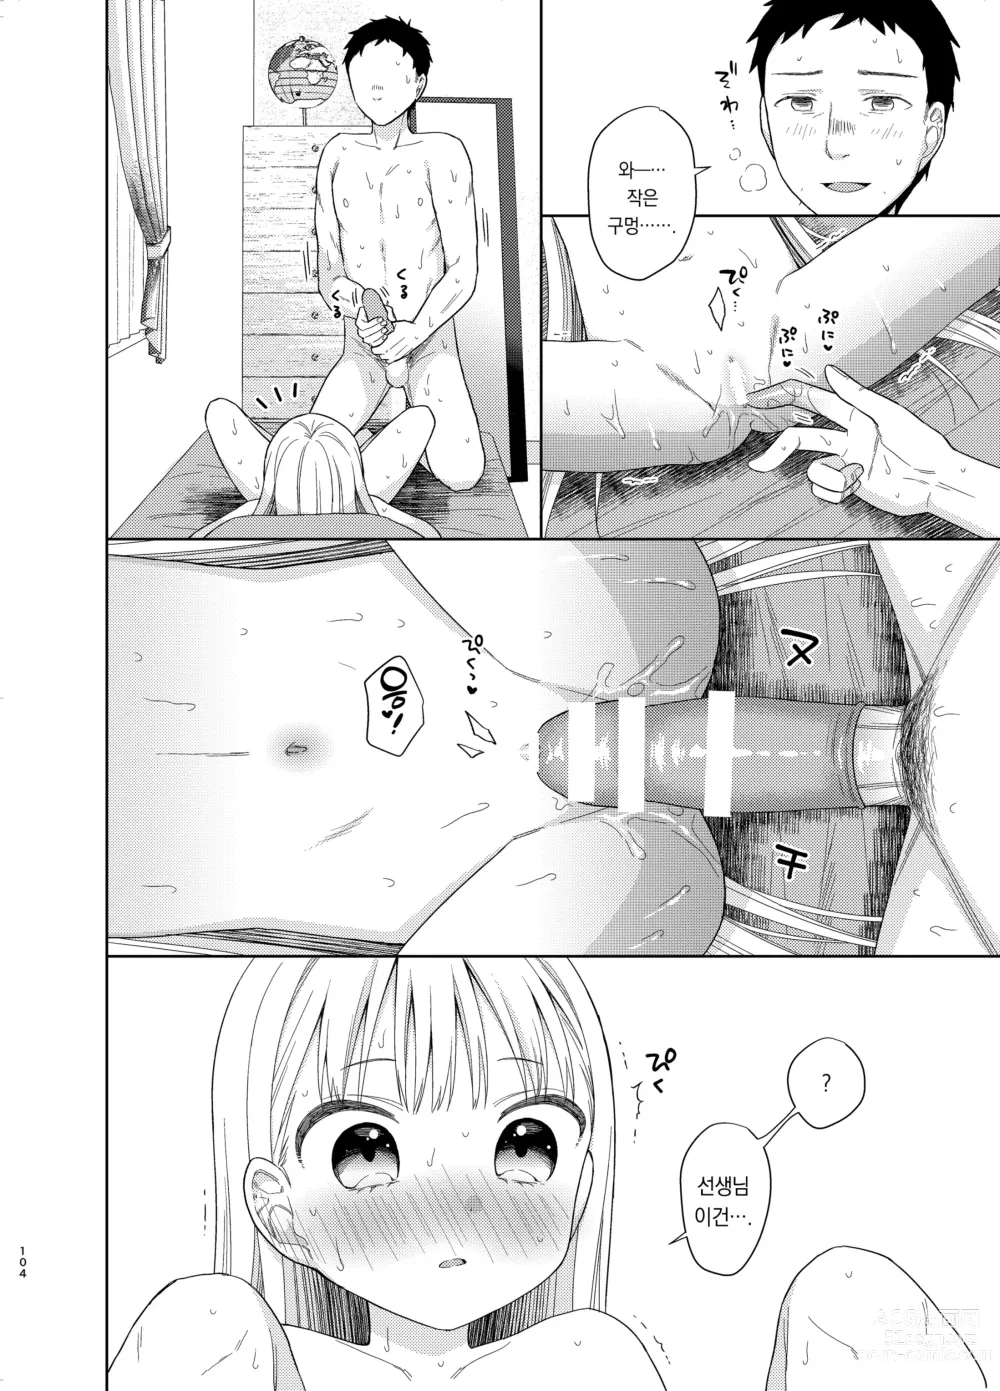 Page 102 of doujinshi TS소녀 하루키 군 5